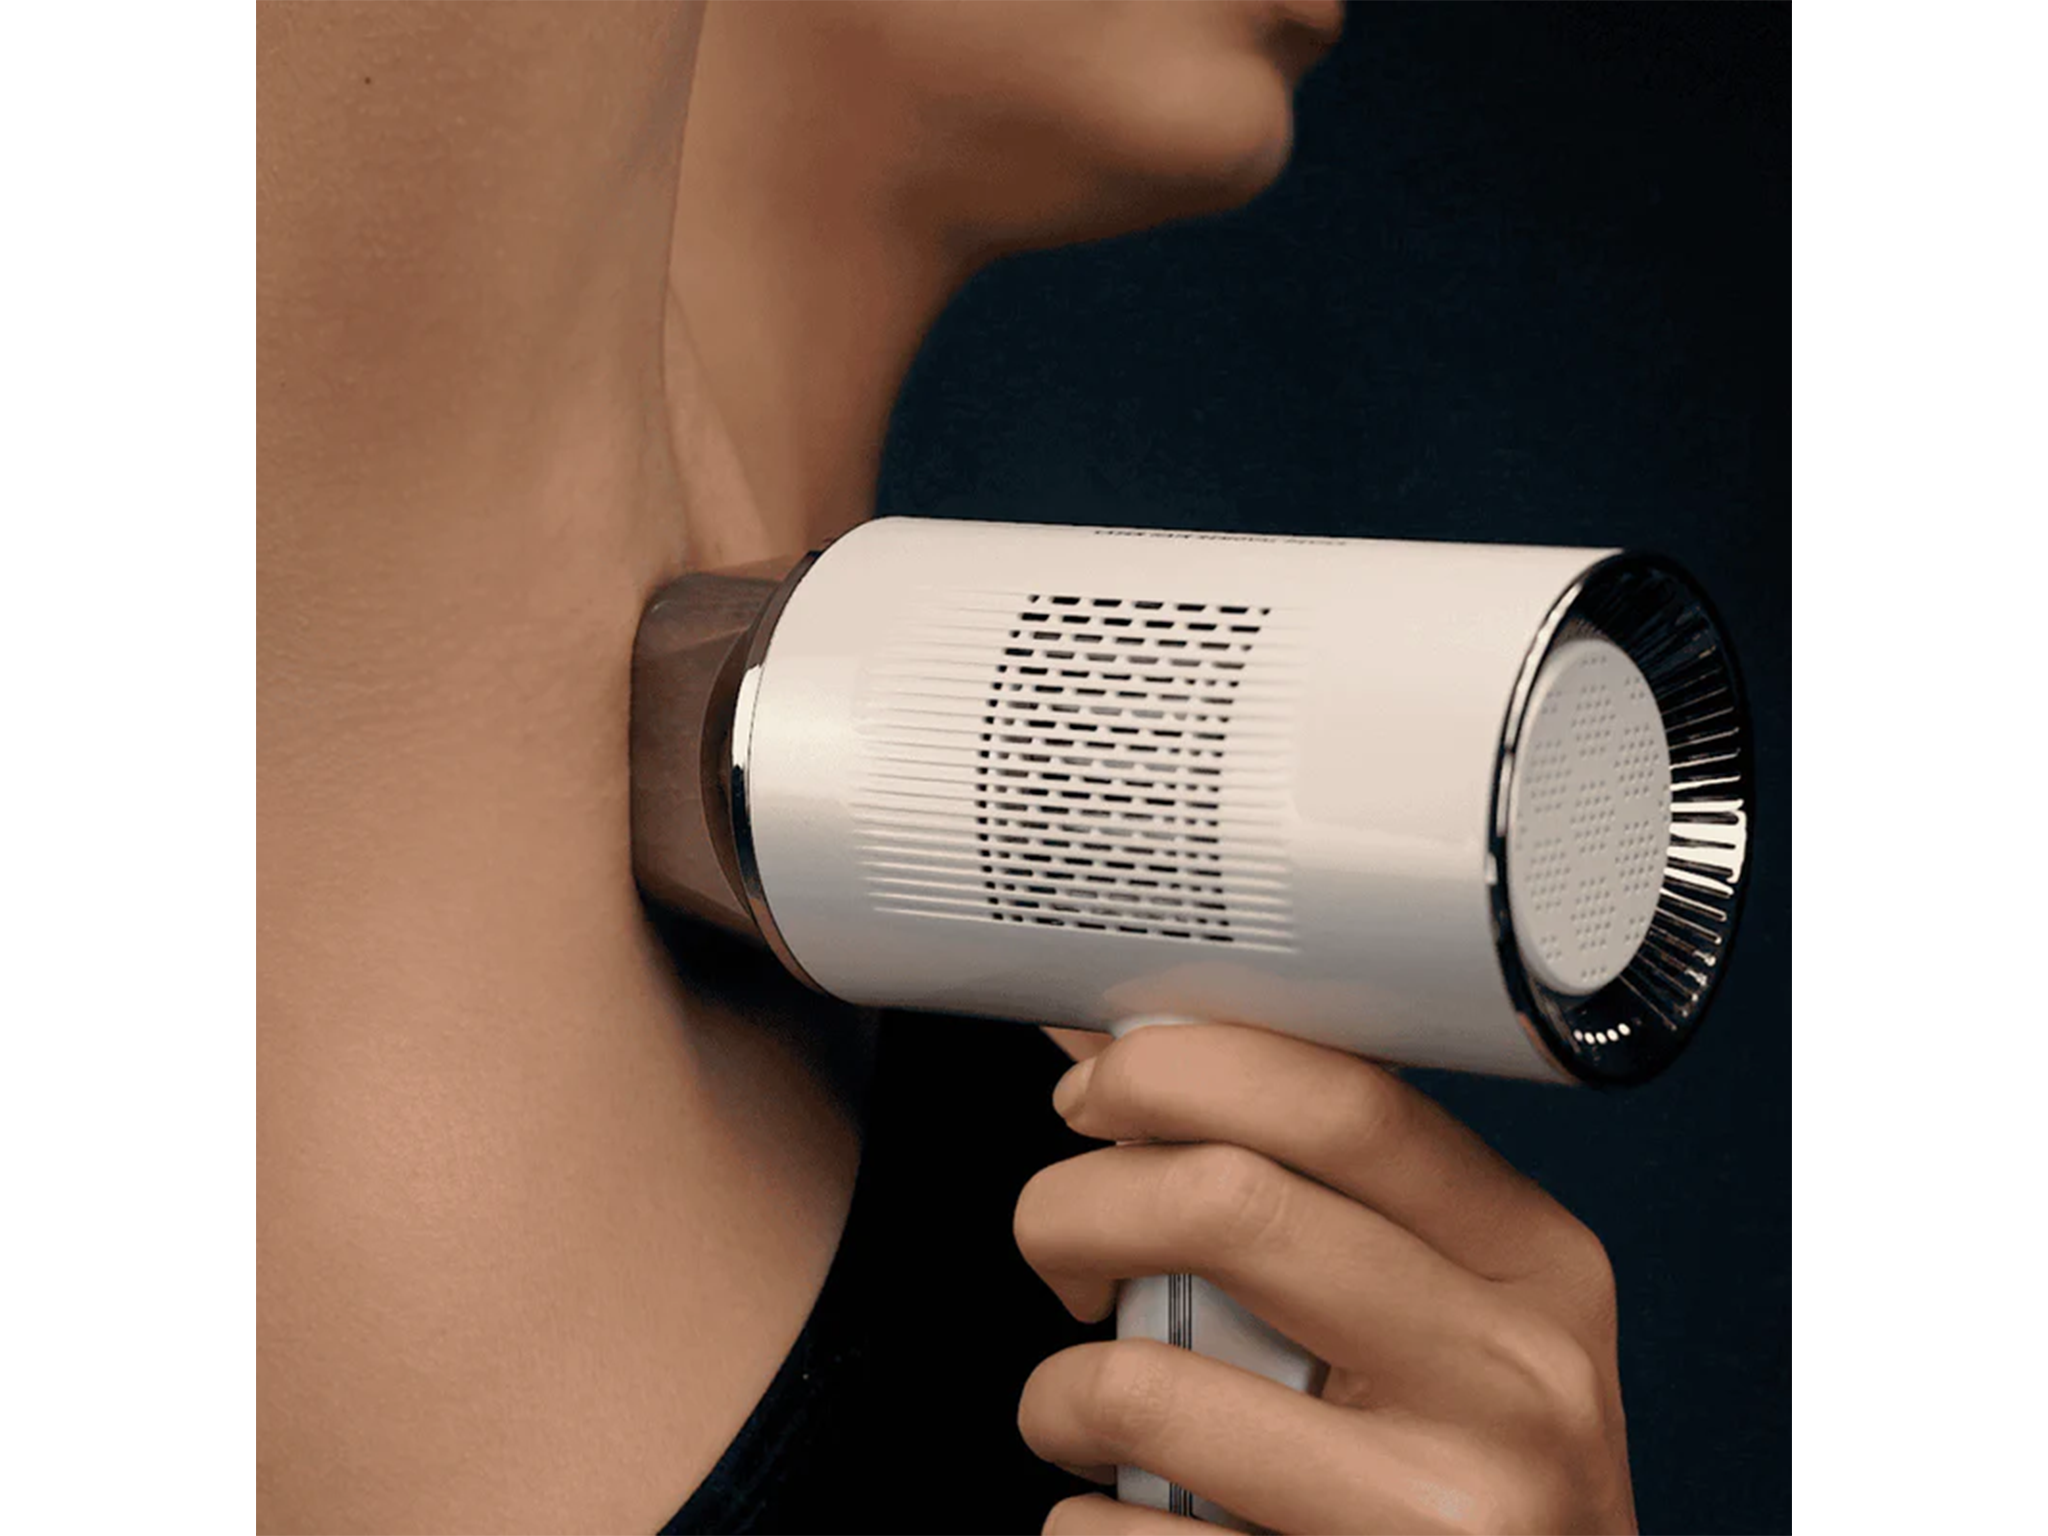 CurrentBody Skin laser hair removal device